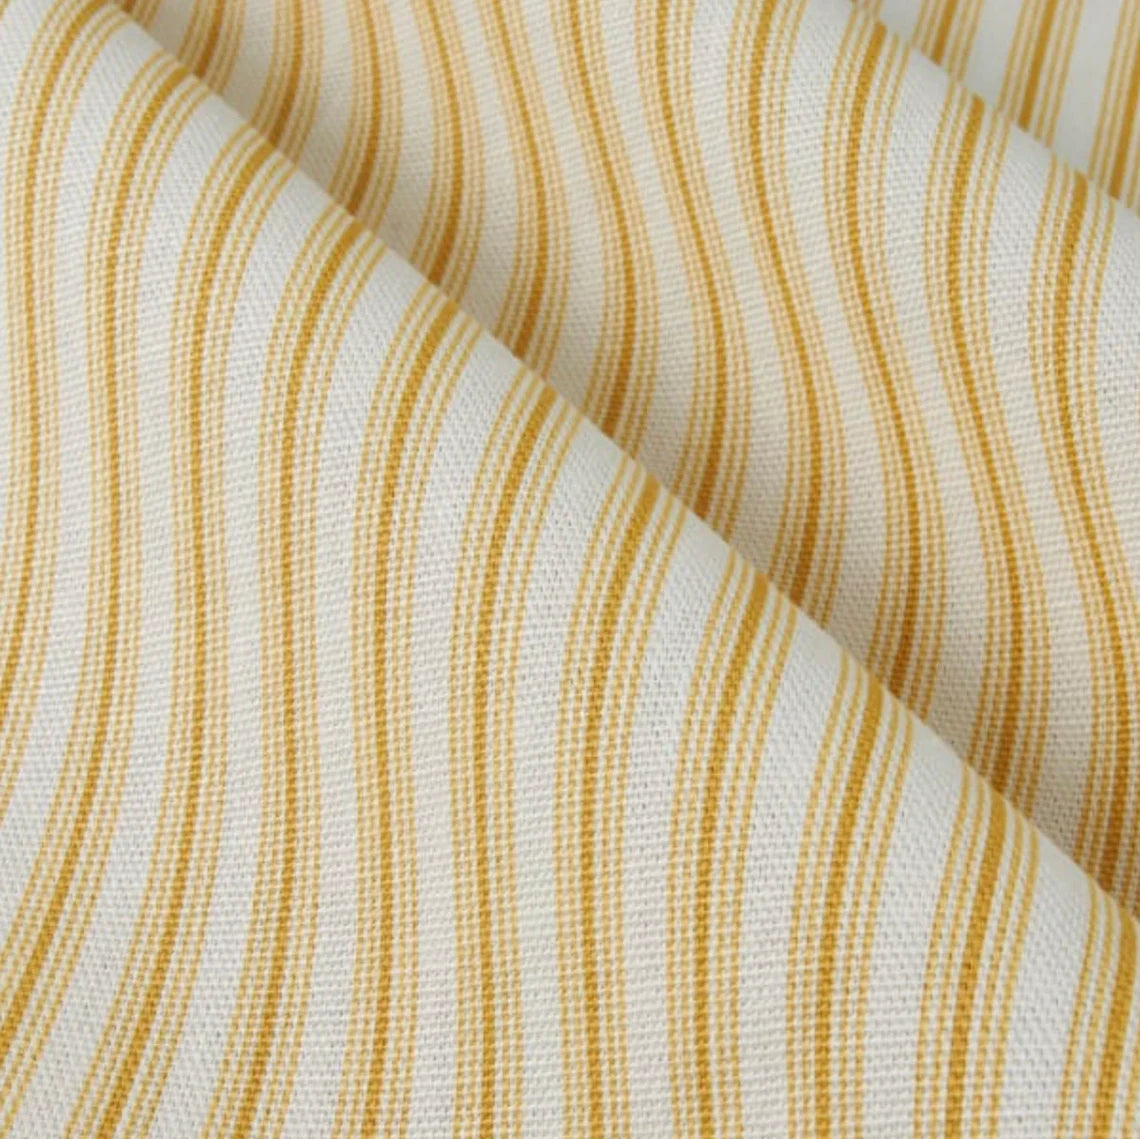 tailored tier cafe curtain panels pair in cottage barley yellow gold stripe